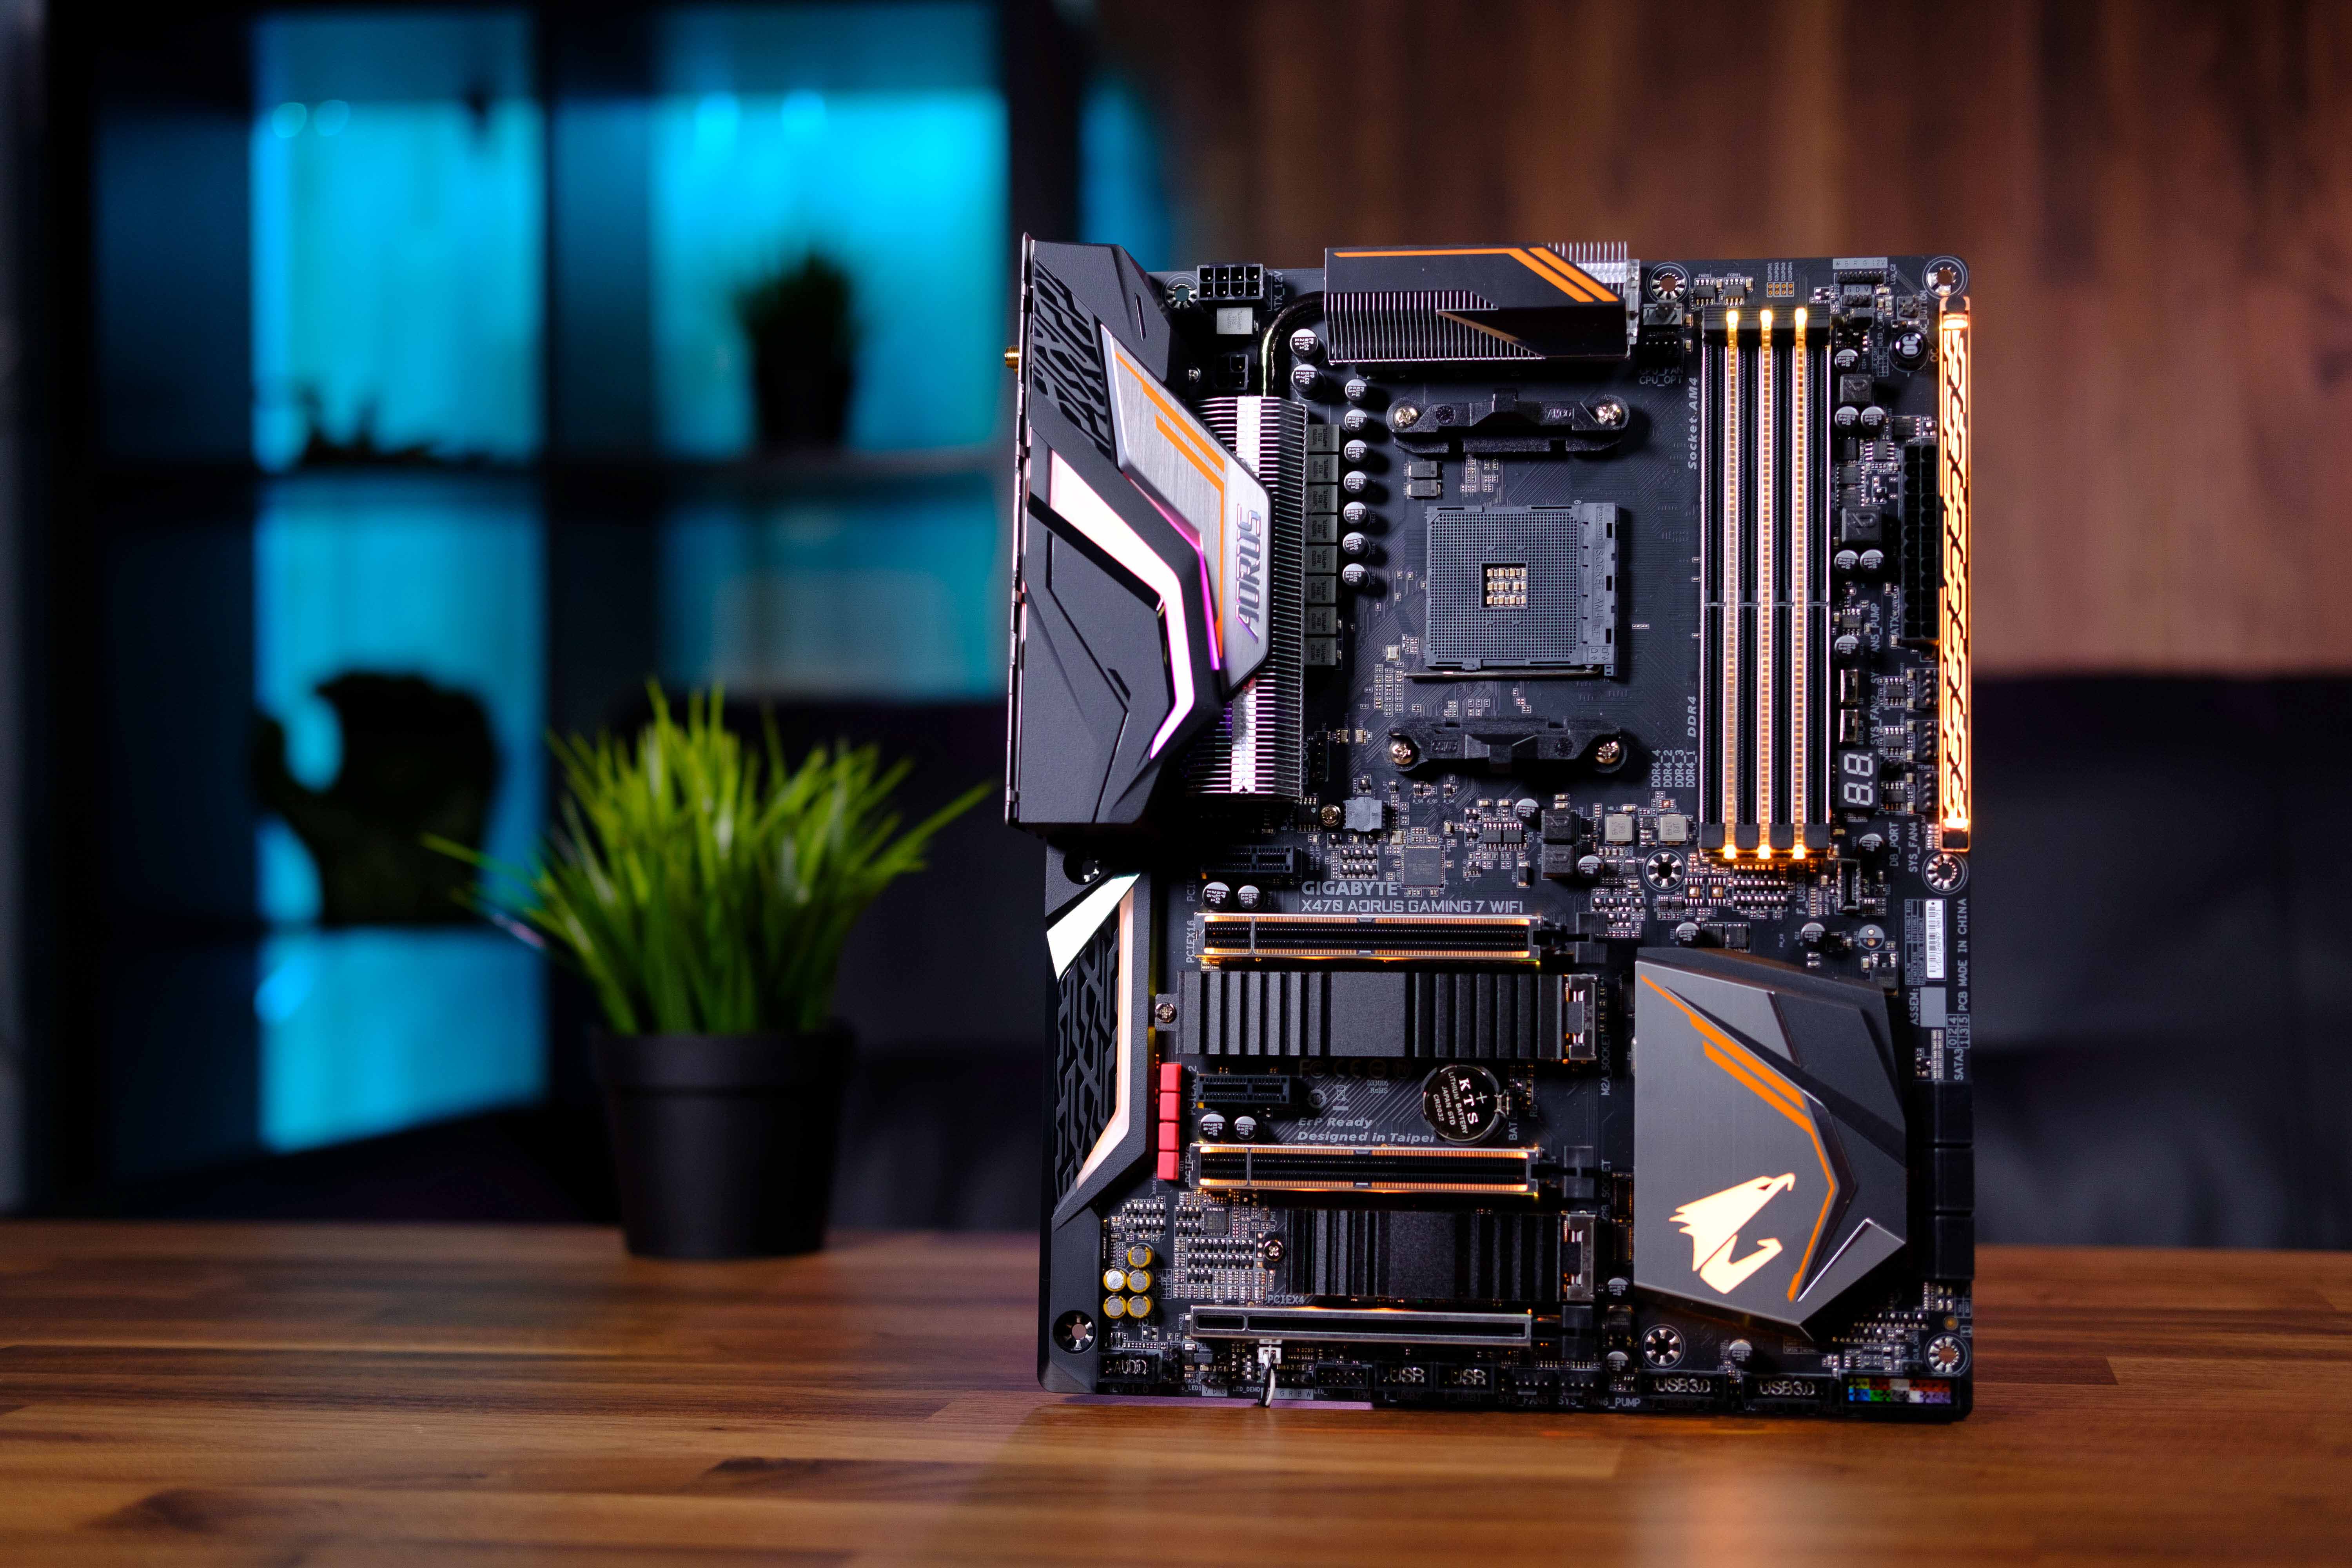 Recycle Eggplant Second grade First Look: X470 AORUS Gaming 7 WIFI | AORUS